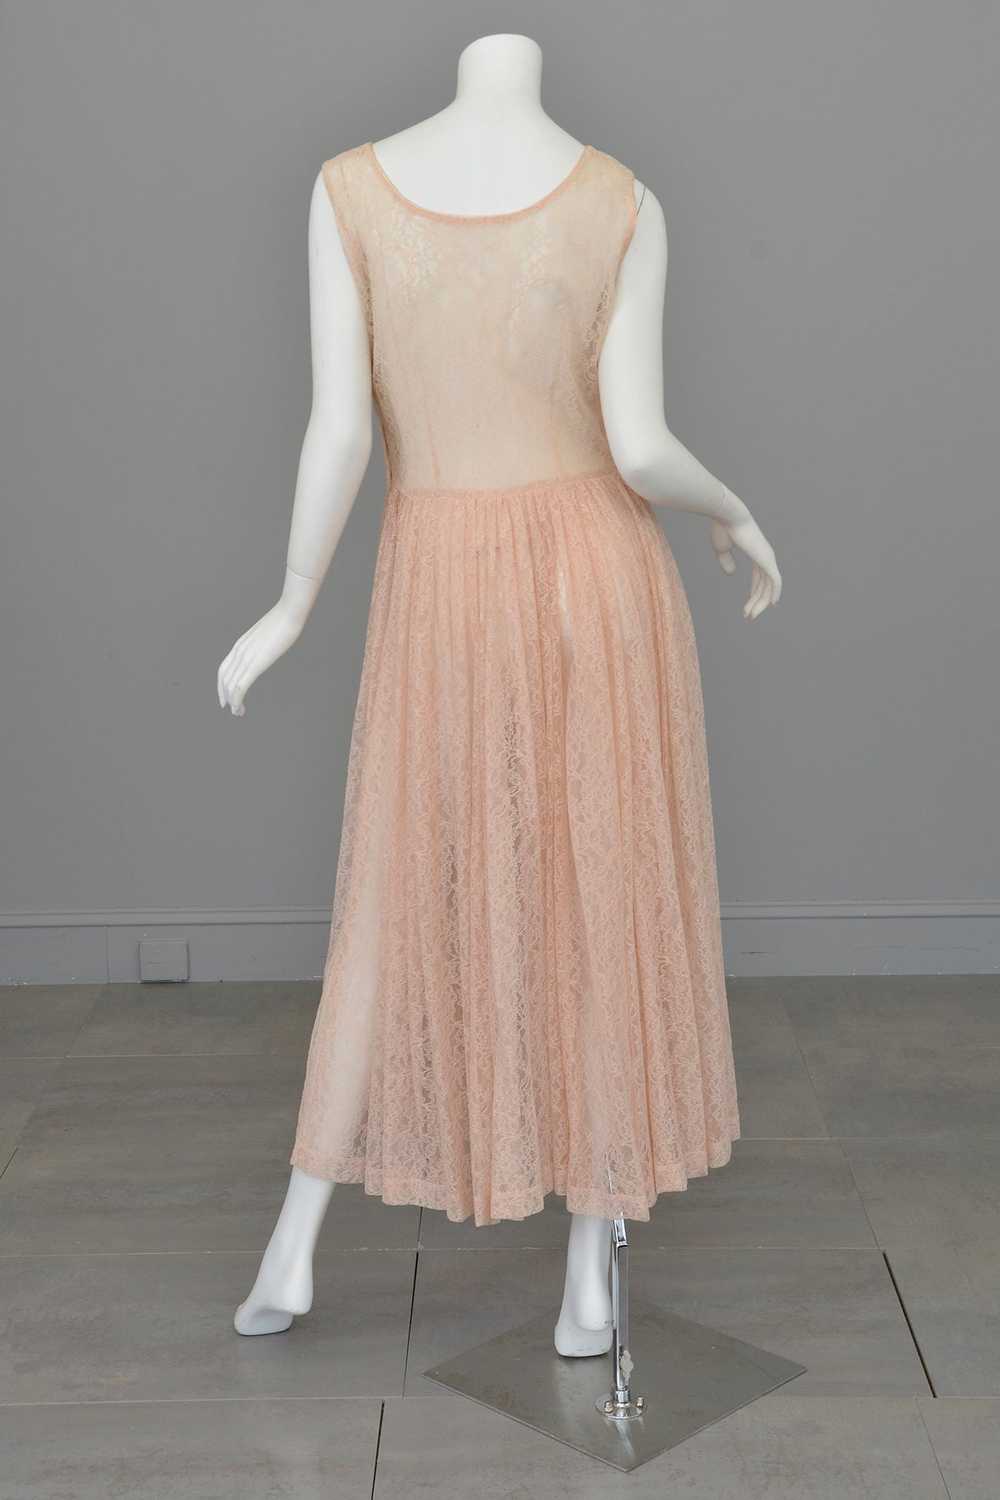 1940s 50s Sheer Light Pink Embroidered Lace Gown - image 6